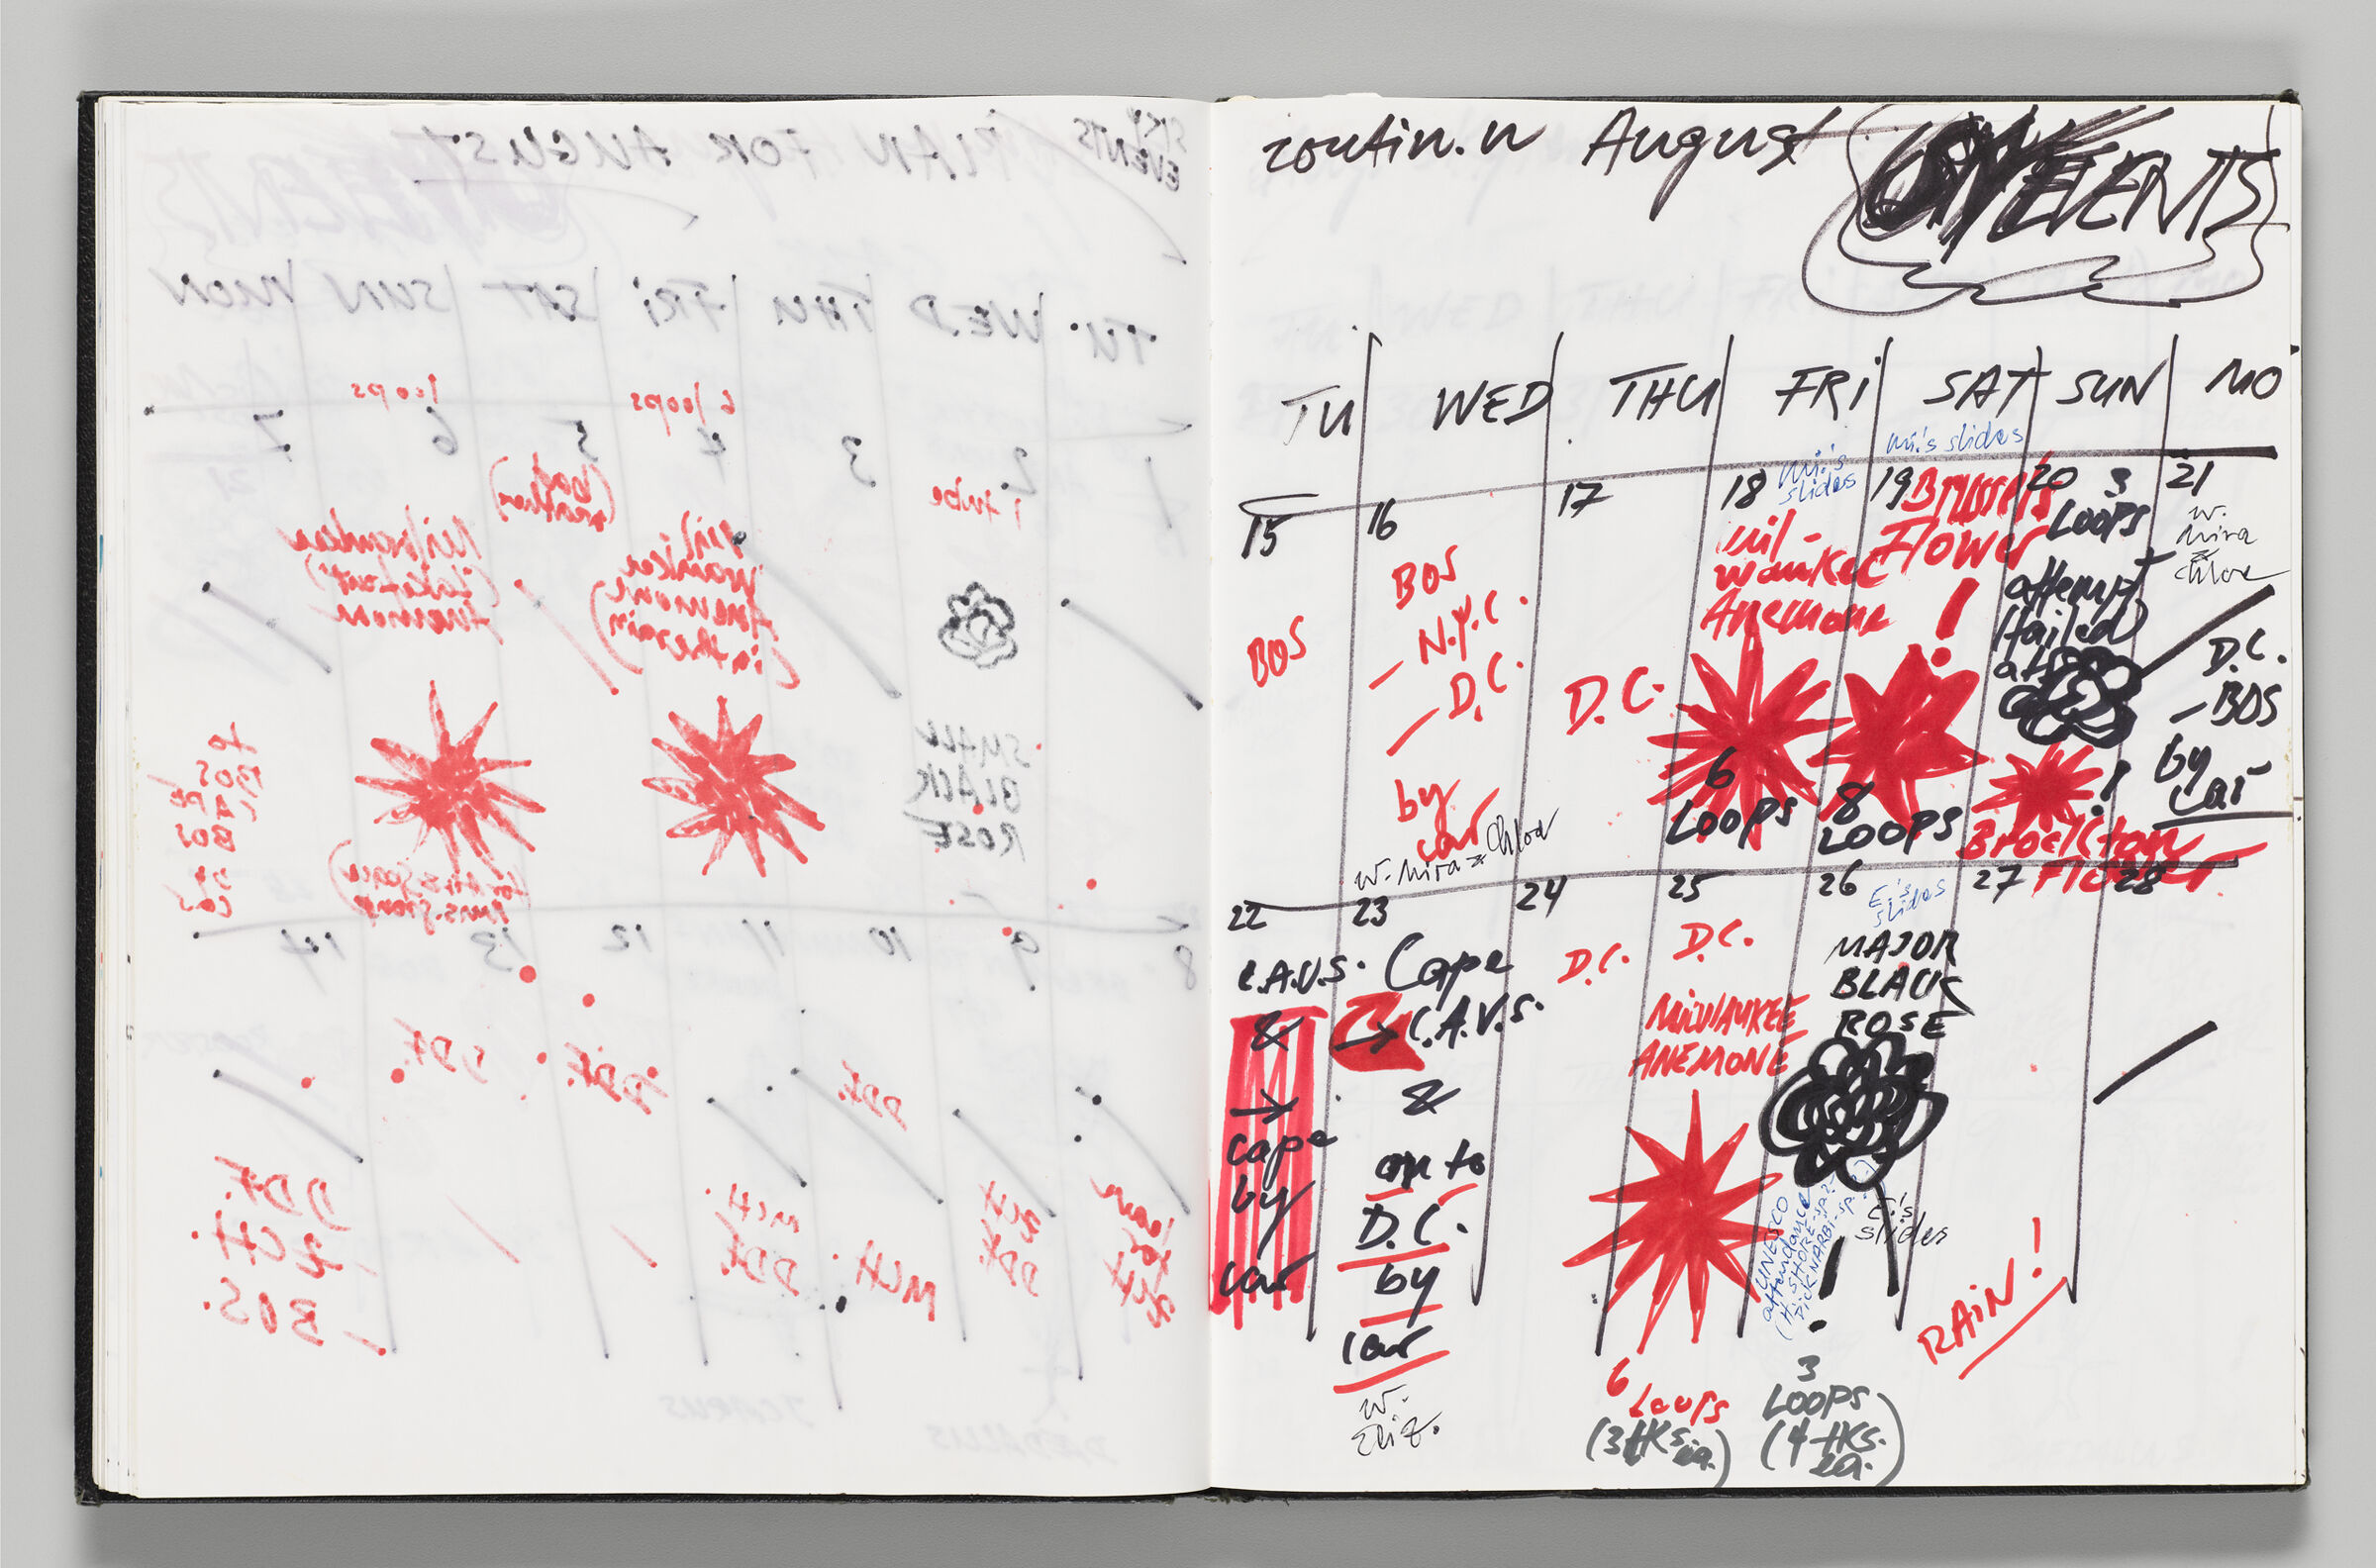 Untitled (Bleed-Through Of Previous Page And Color Transfer, Left Page); Untitled (Calendar For August 1978 With Color Transfer, Right Page)